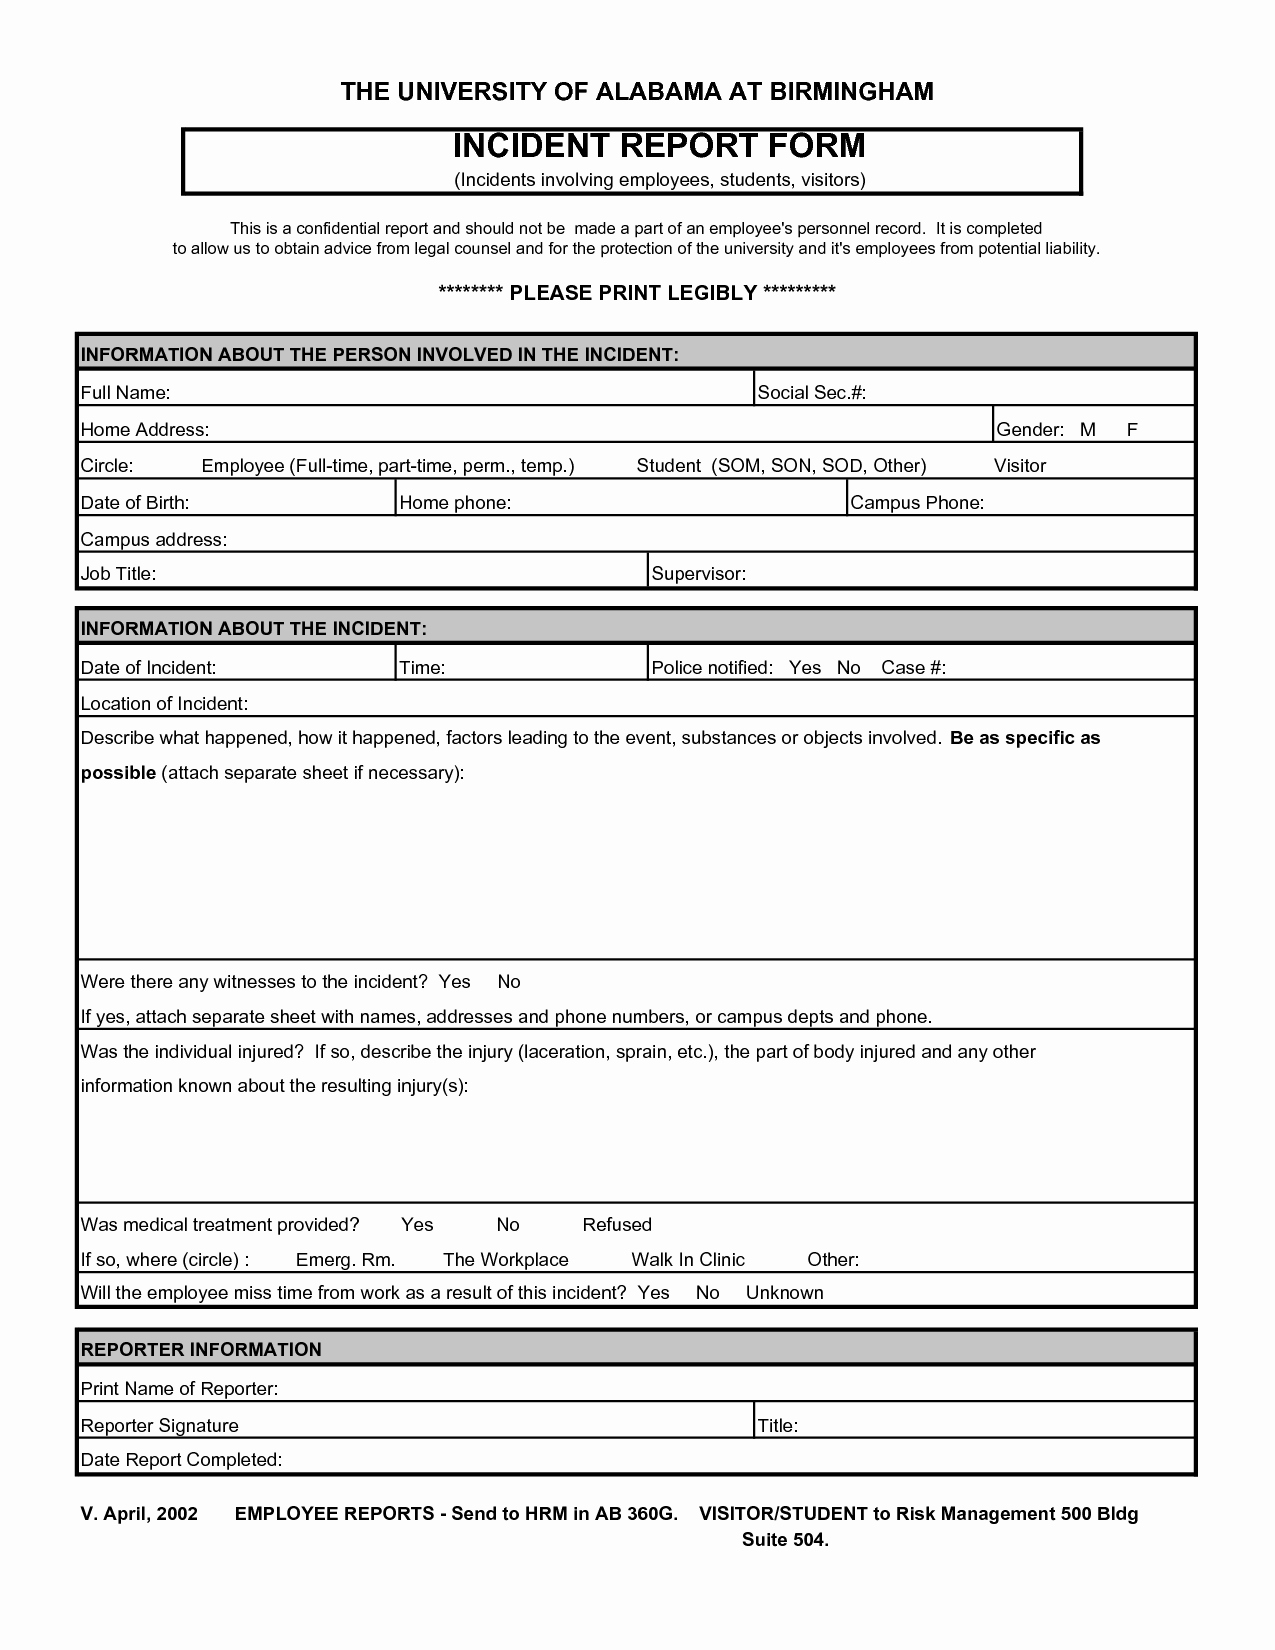 Incident Report form Template Best Of 13 Incident Report Templates Excel Pdf formats